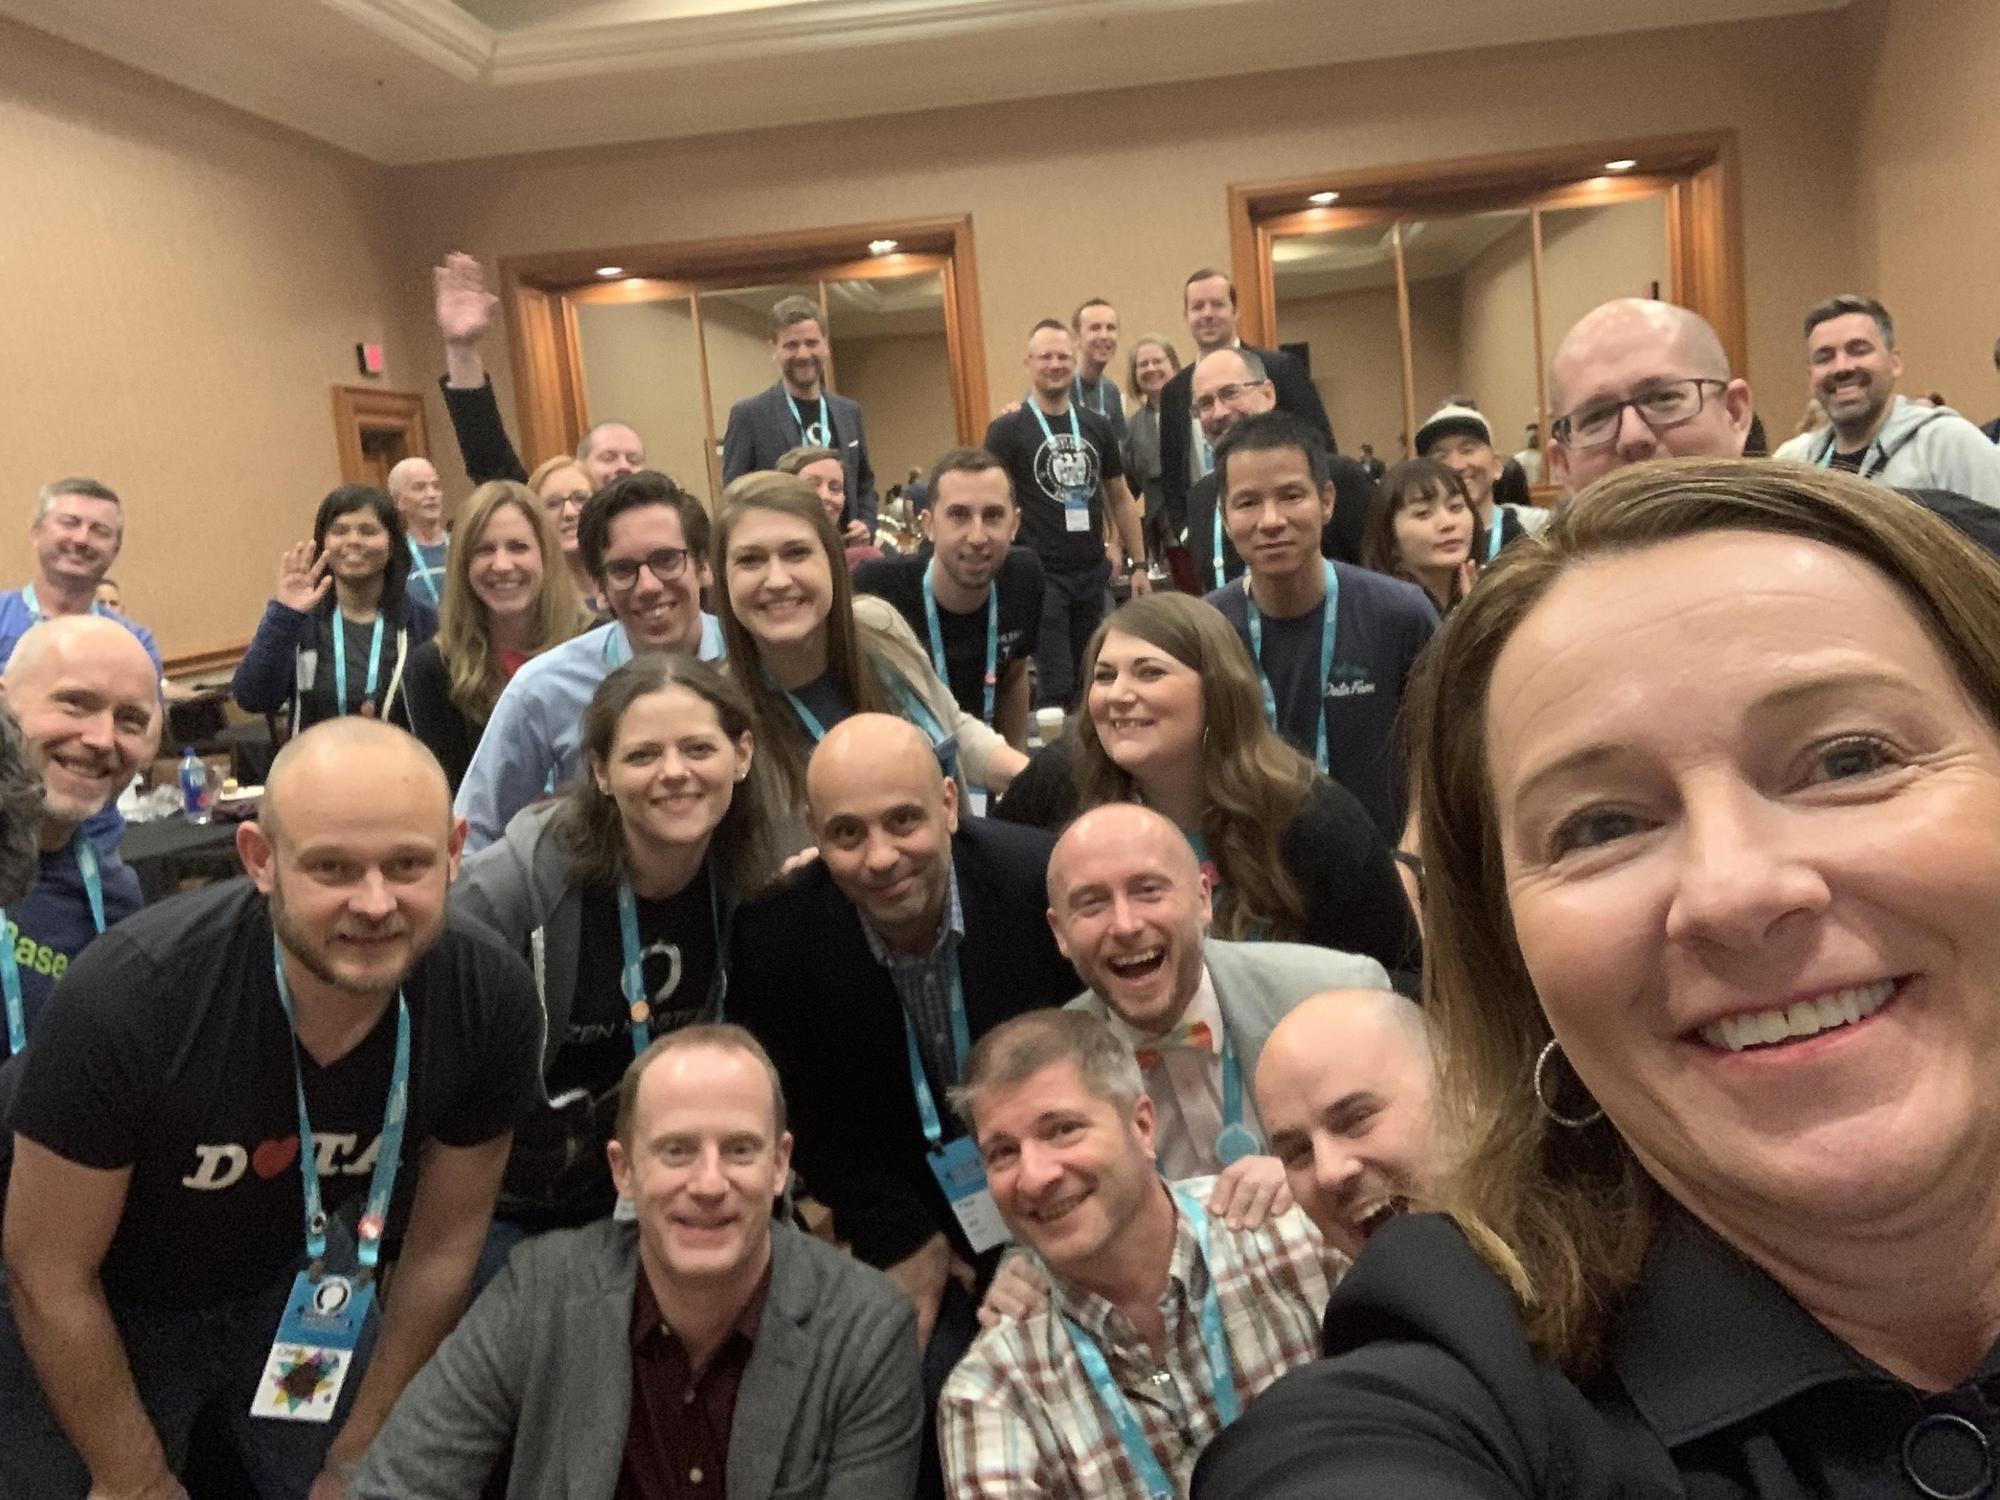 Large group of people with badges taking selfie at a conference